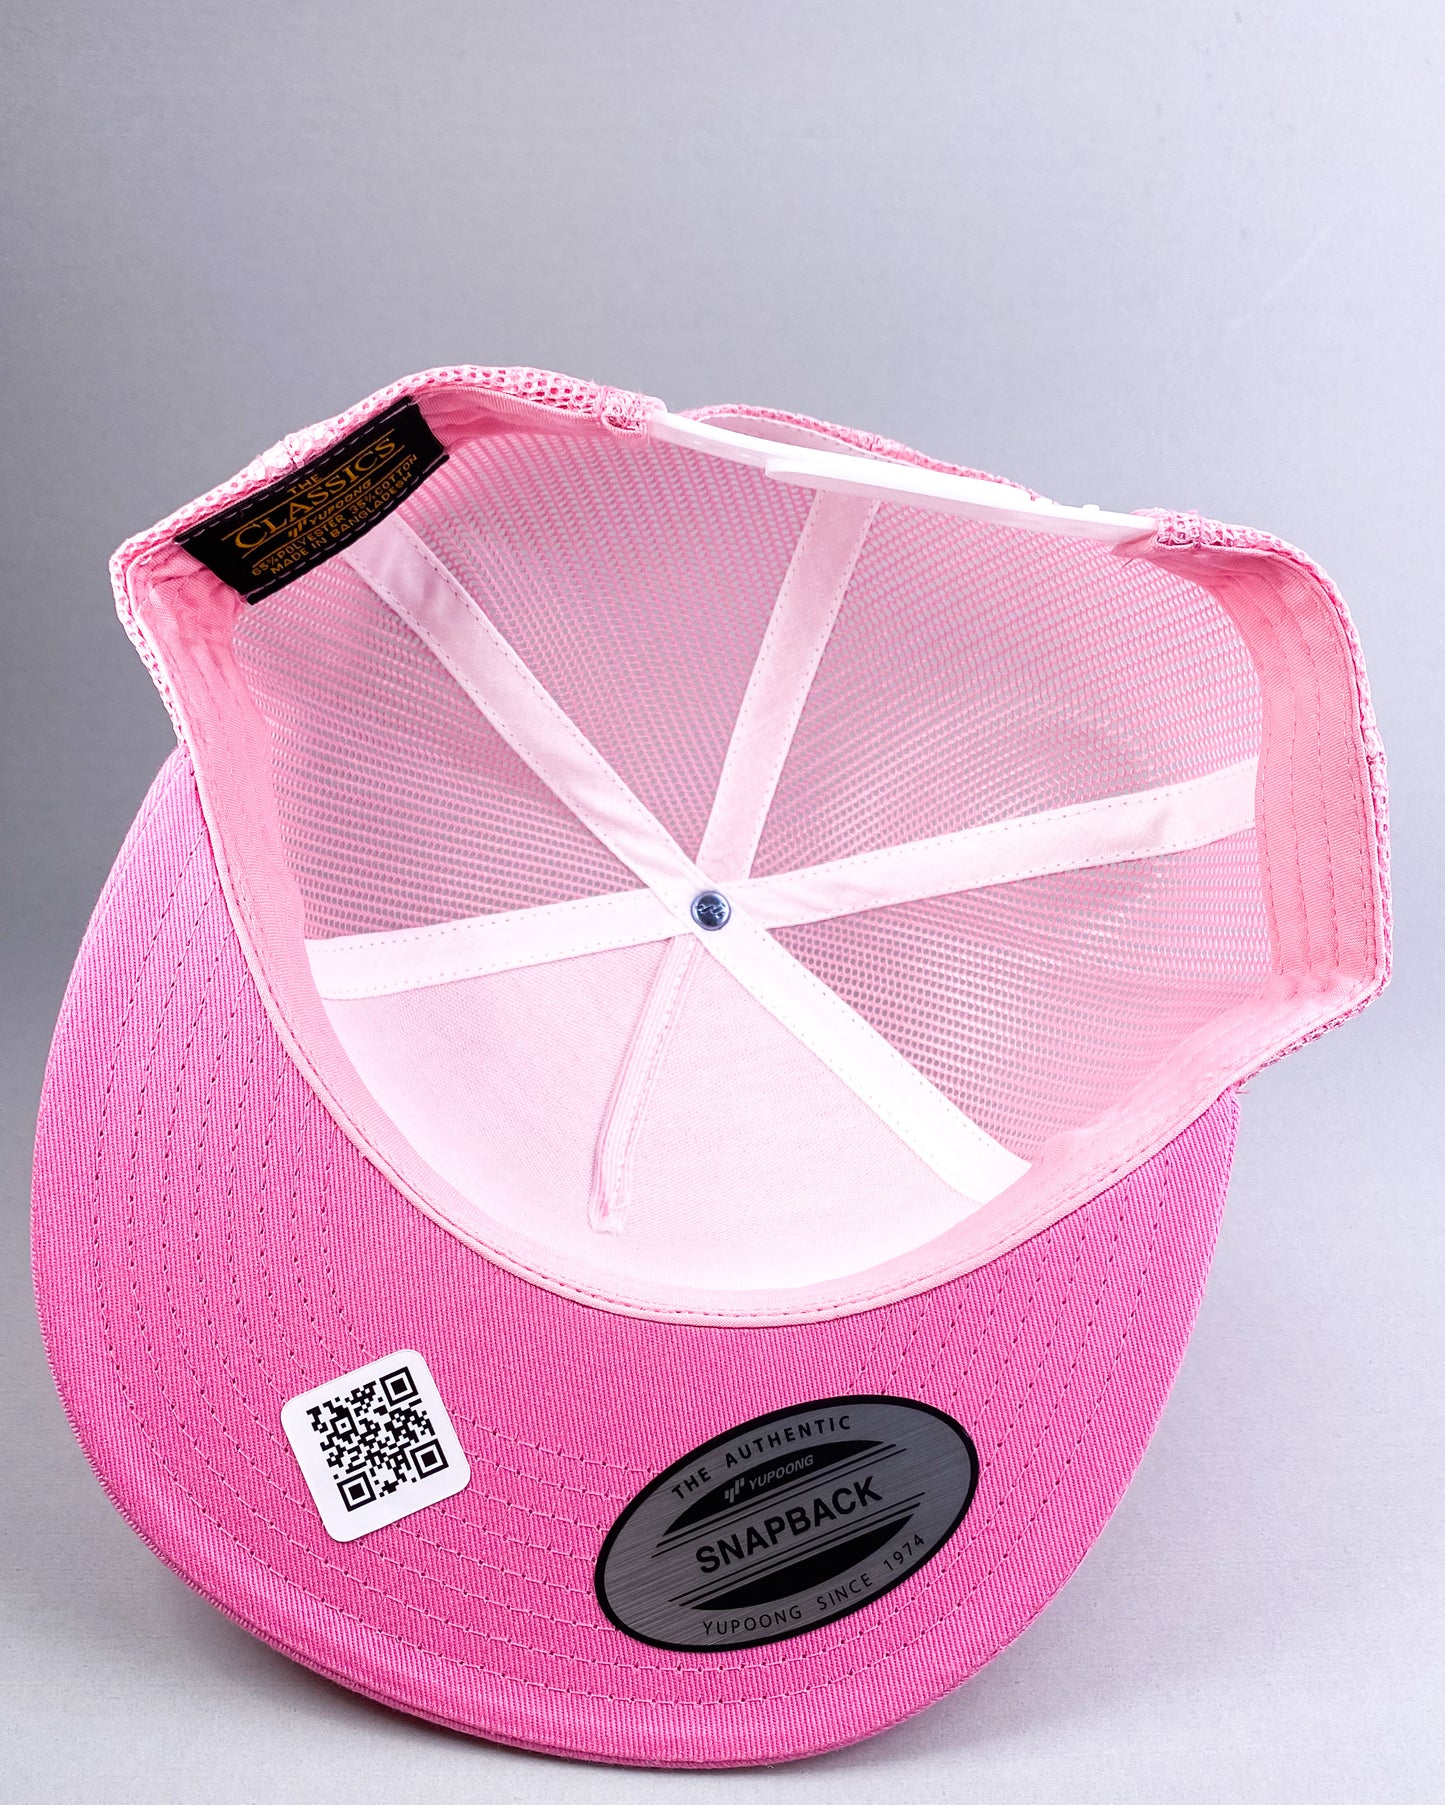 Bravo Premium hat in hot pink with flamingo design leather patch